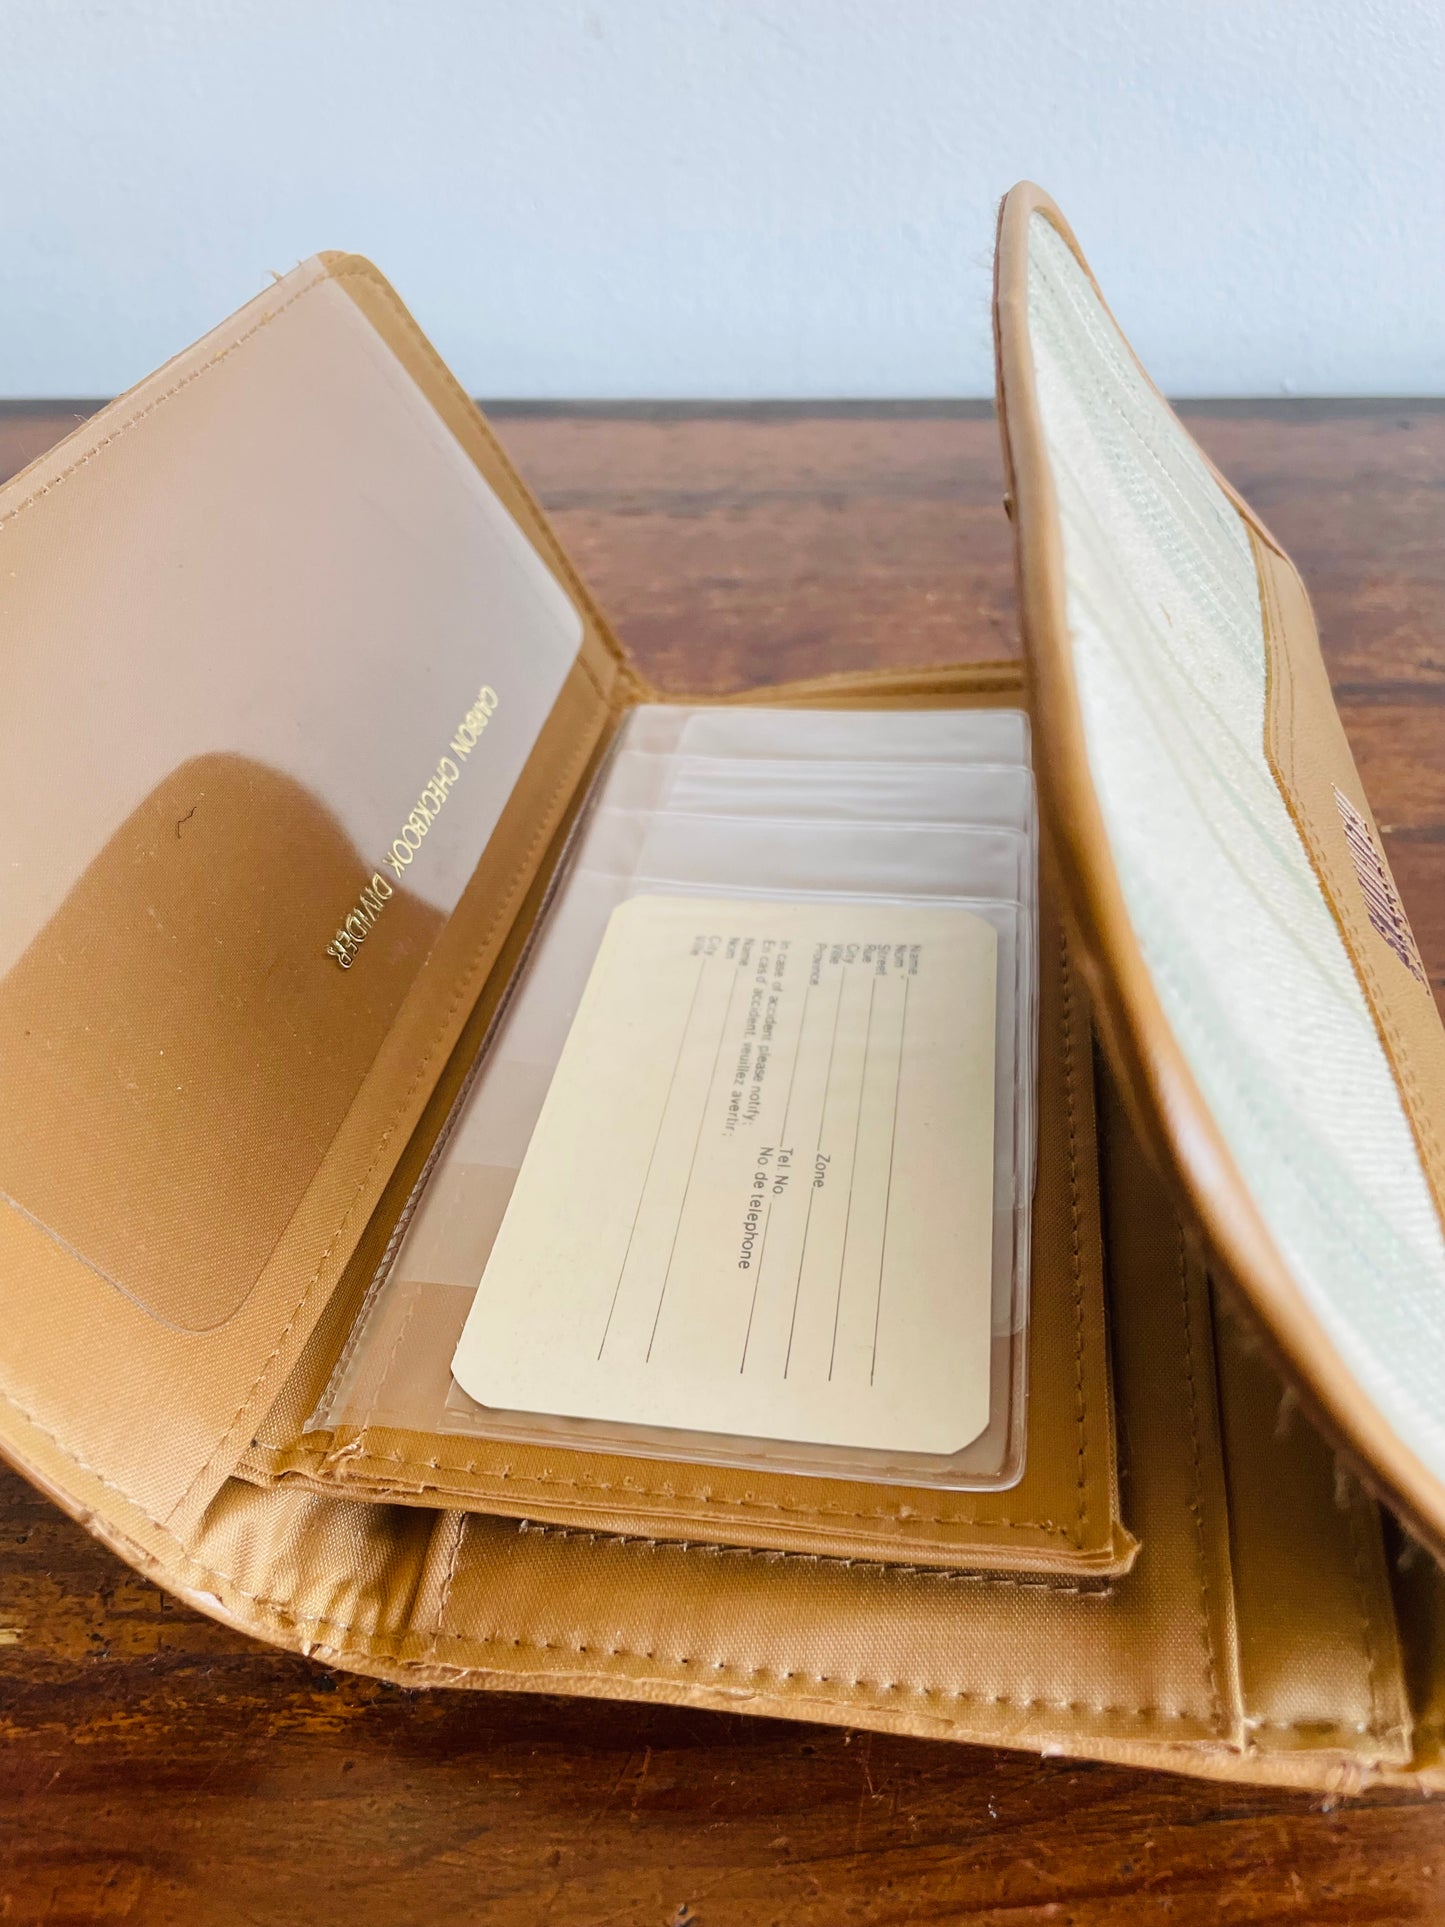 Classic Traditions Tan & Pastel Striped Wallet